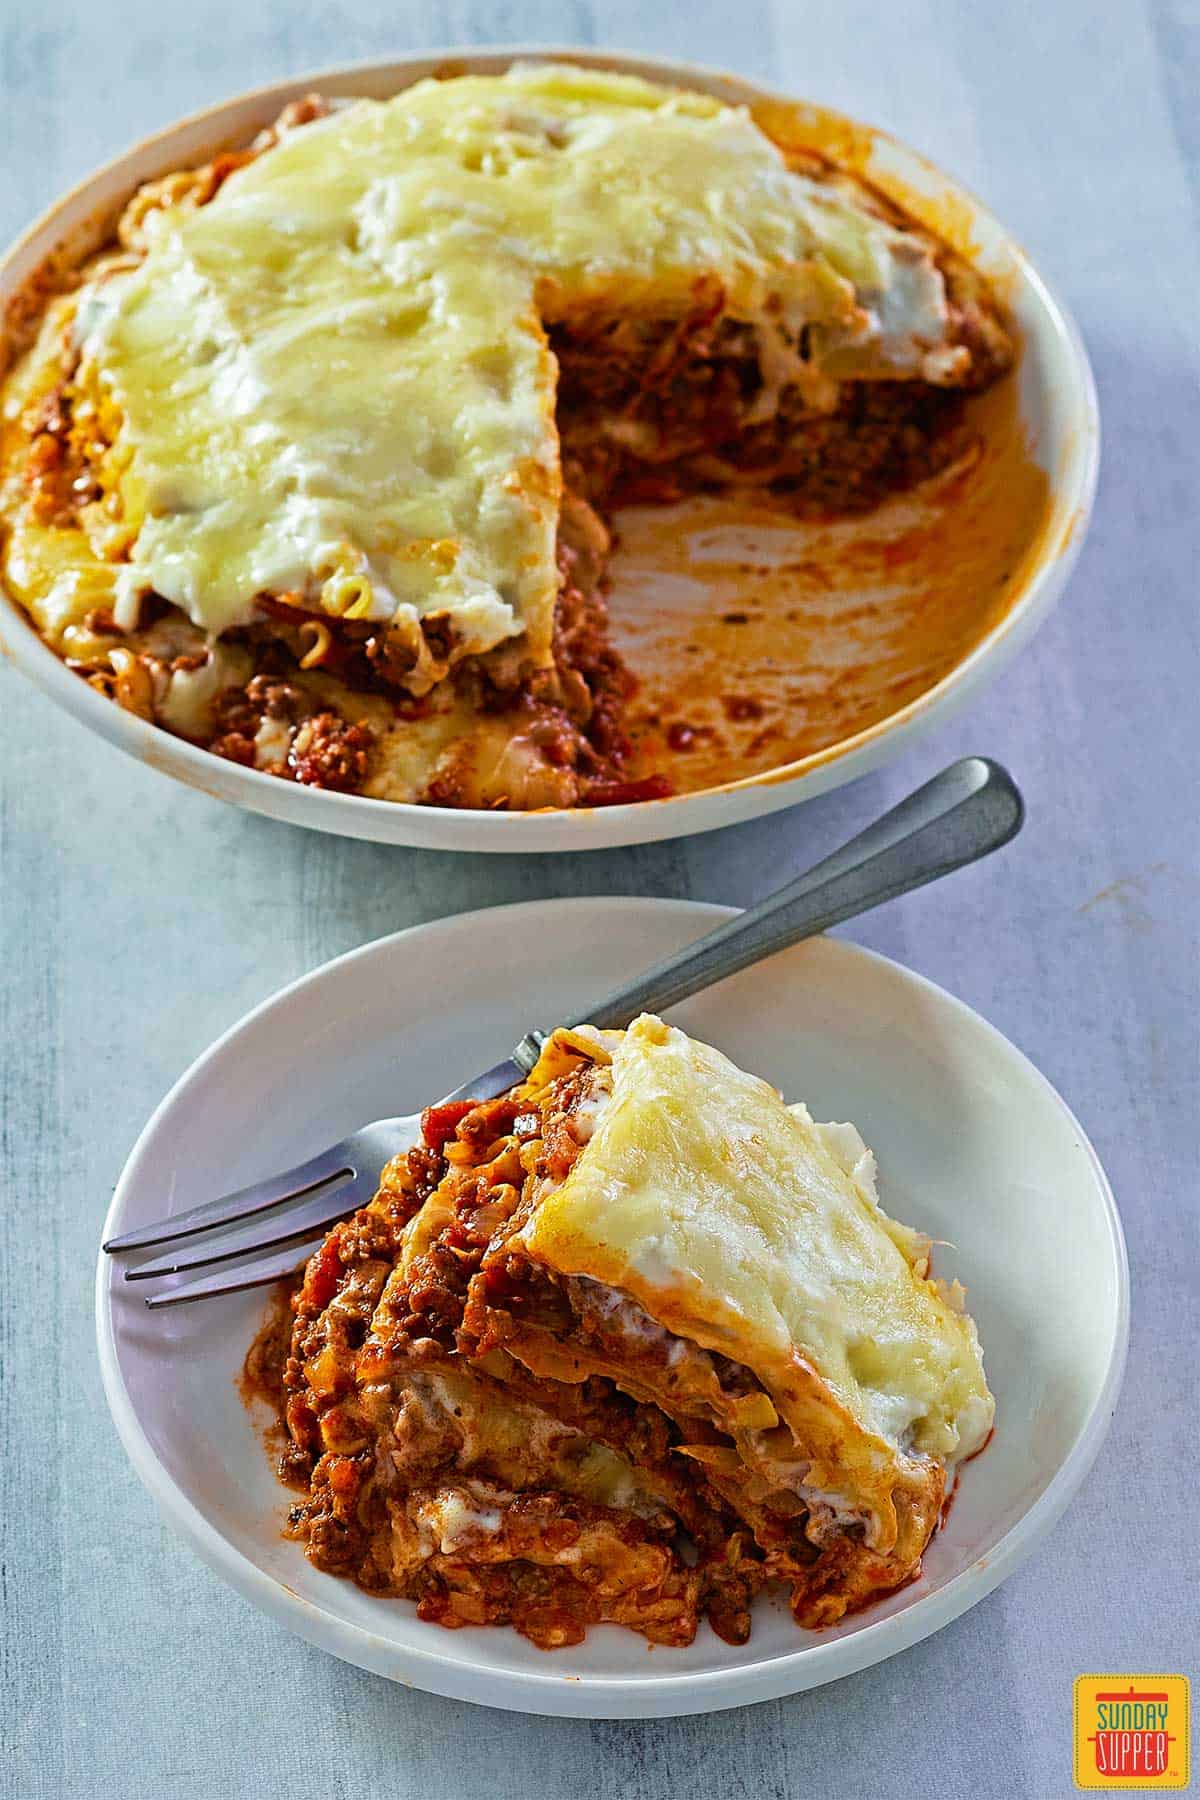 instant pot lasagna served on a plate next to dish of lasagna